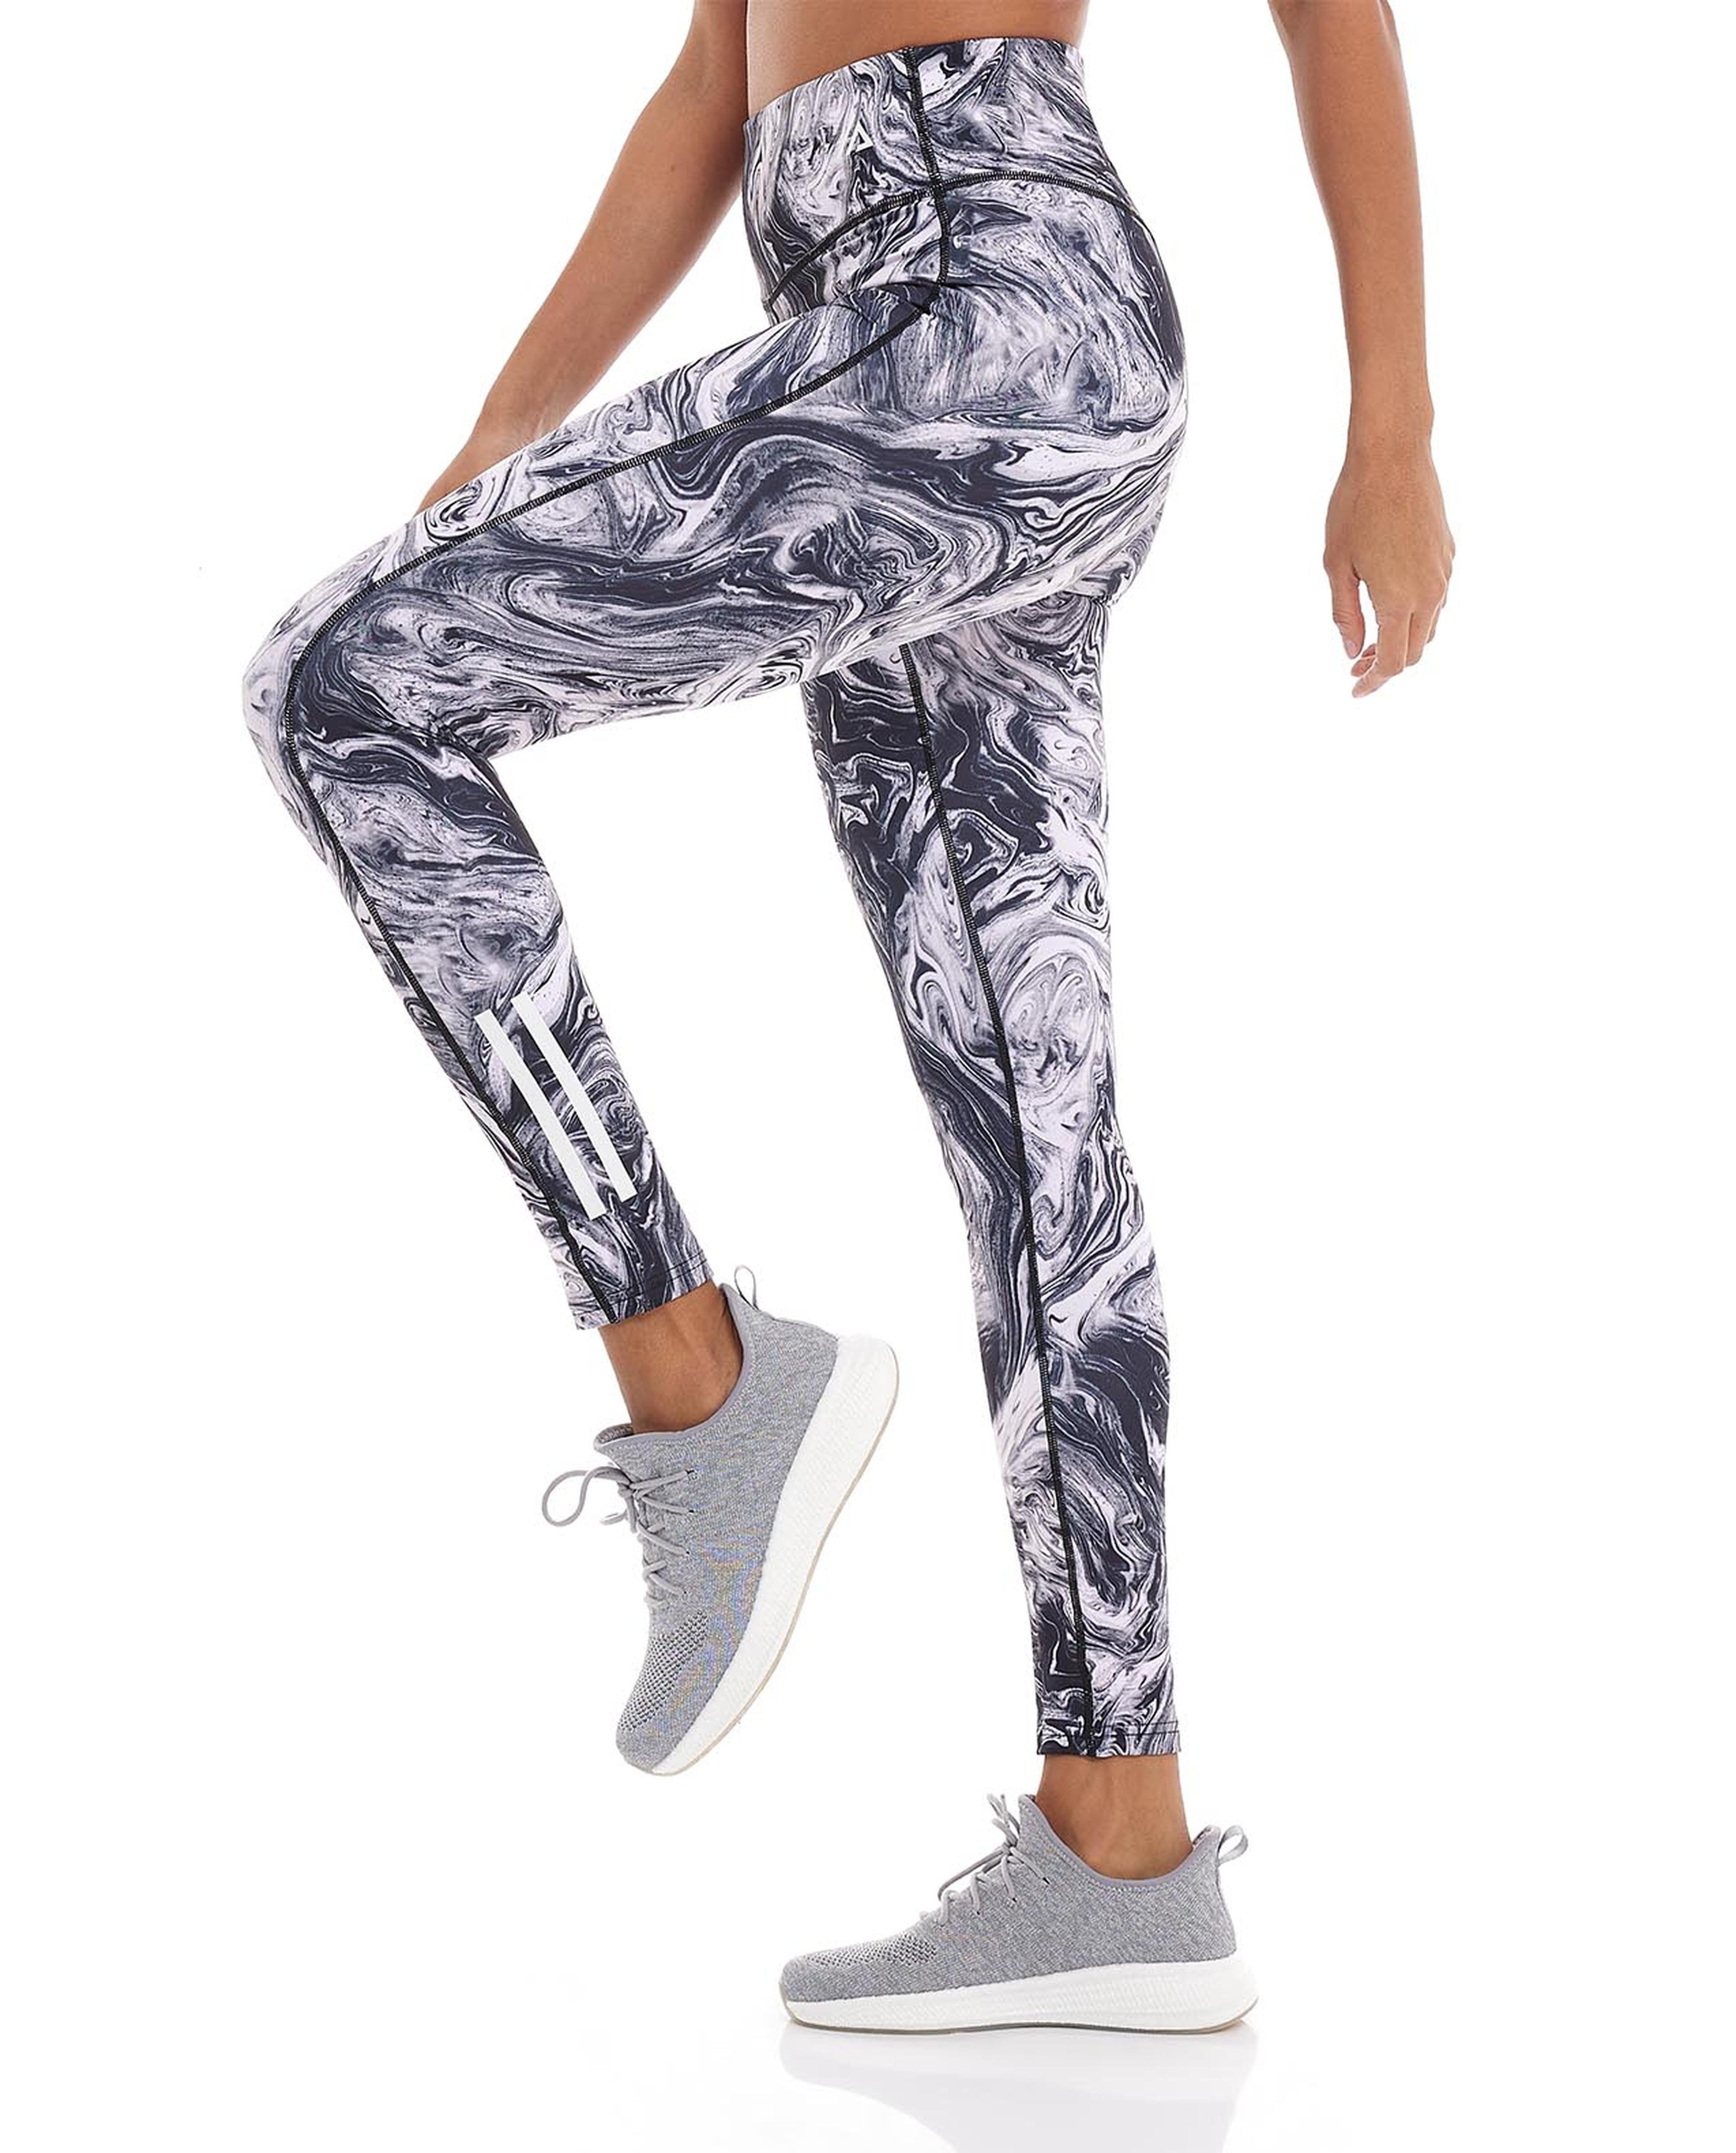 Printed Active Leggings with Elasticated Waistband